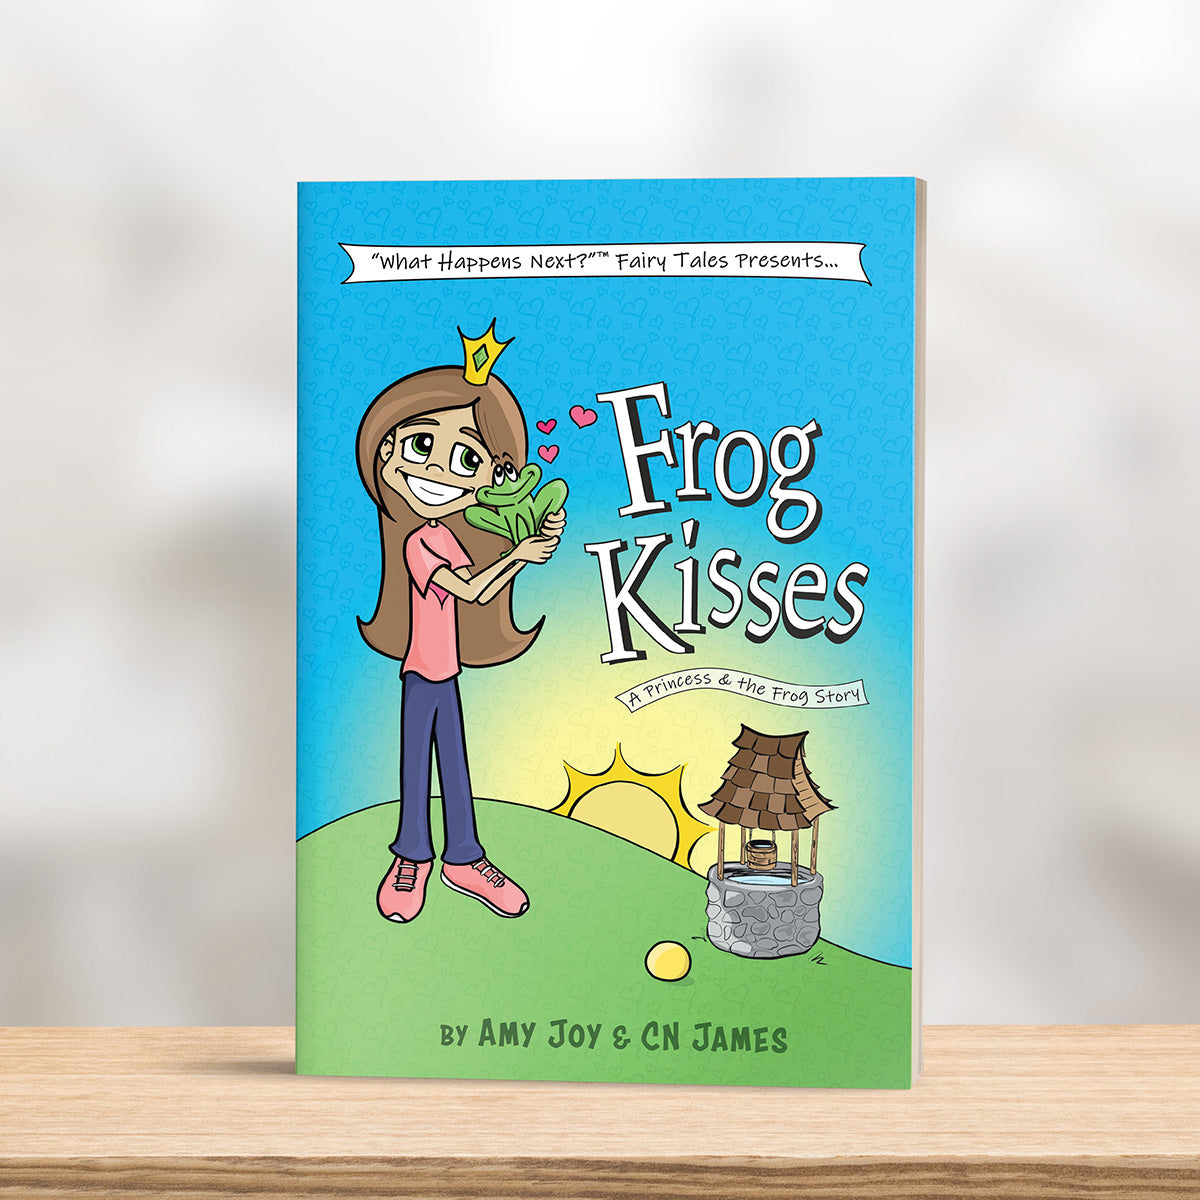 Paperback edition of Frog Kisses by Amy Joy and CN James on shelf